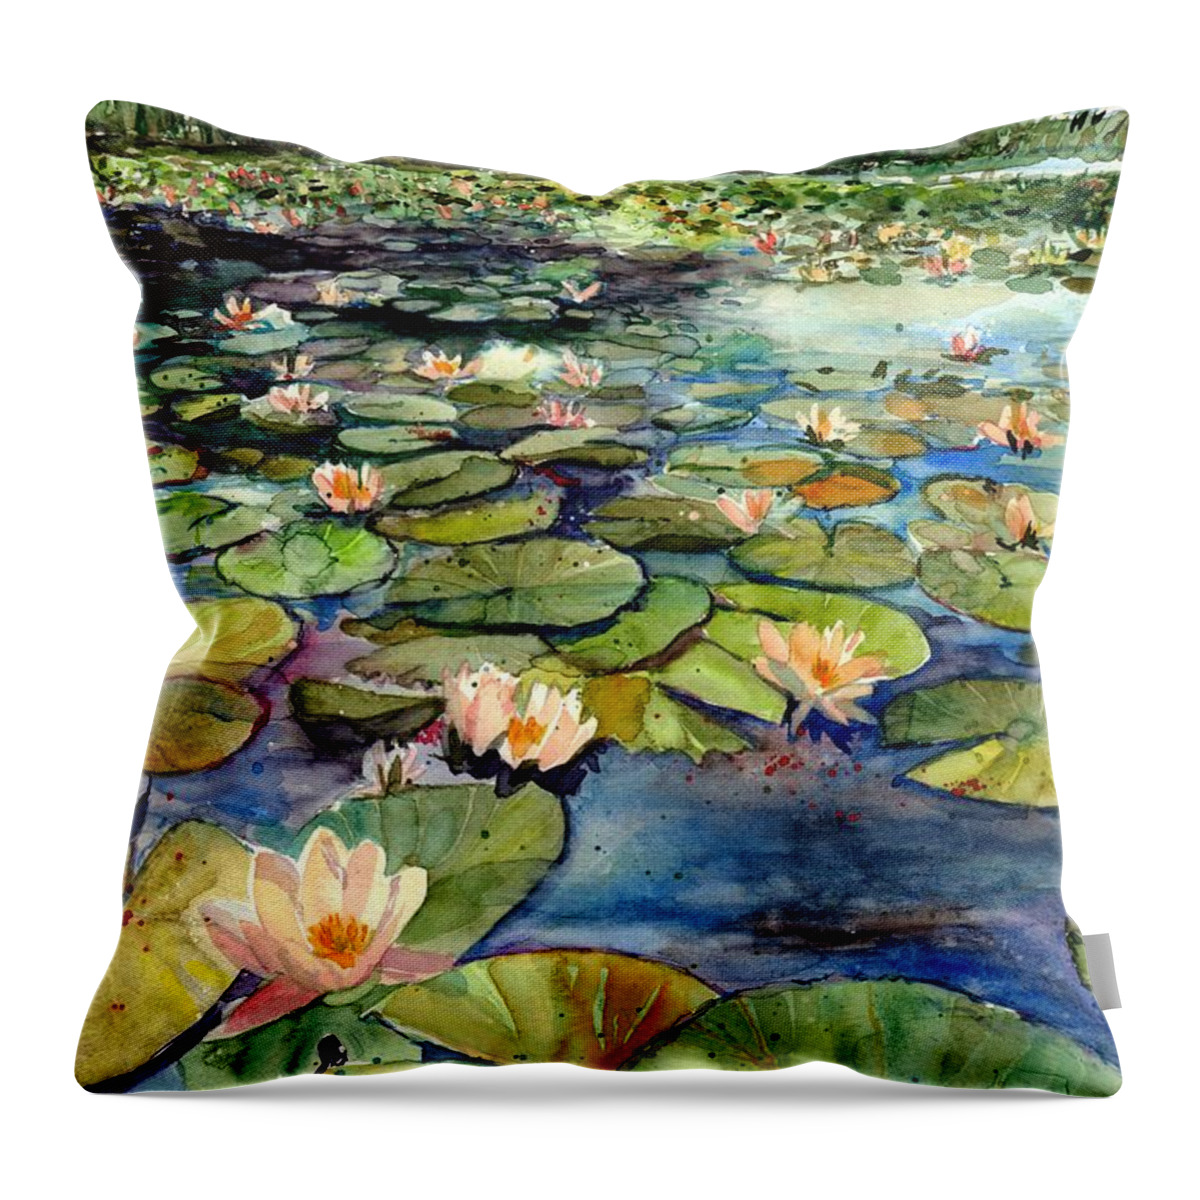 Water Lily Throw Pillow featuring the painting Water Lilies In The Afternoon by Suzann Sines